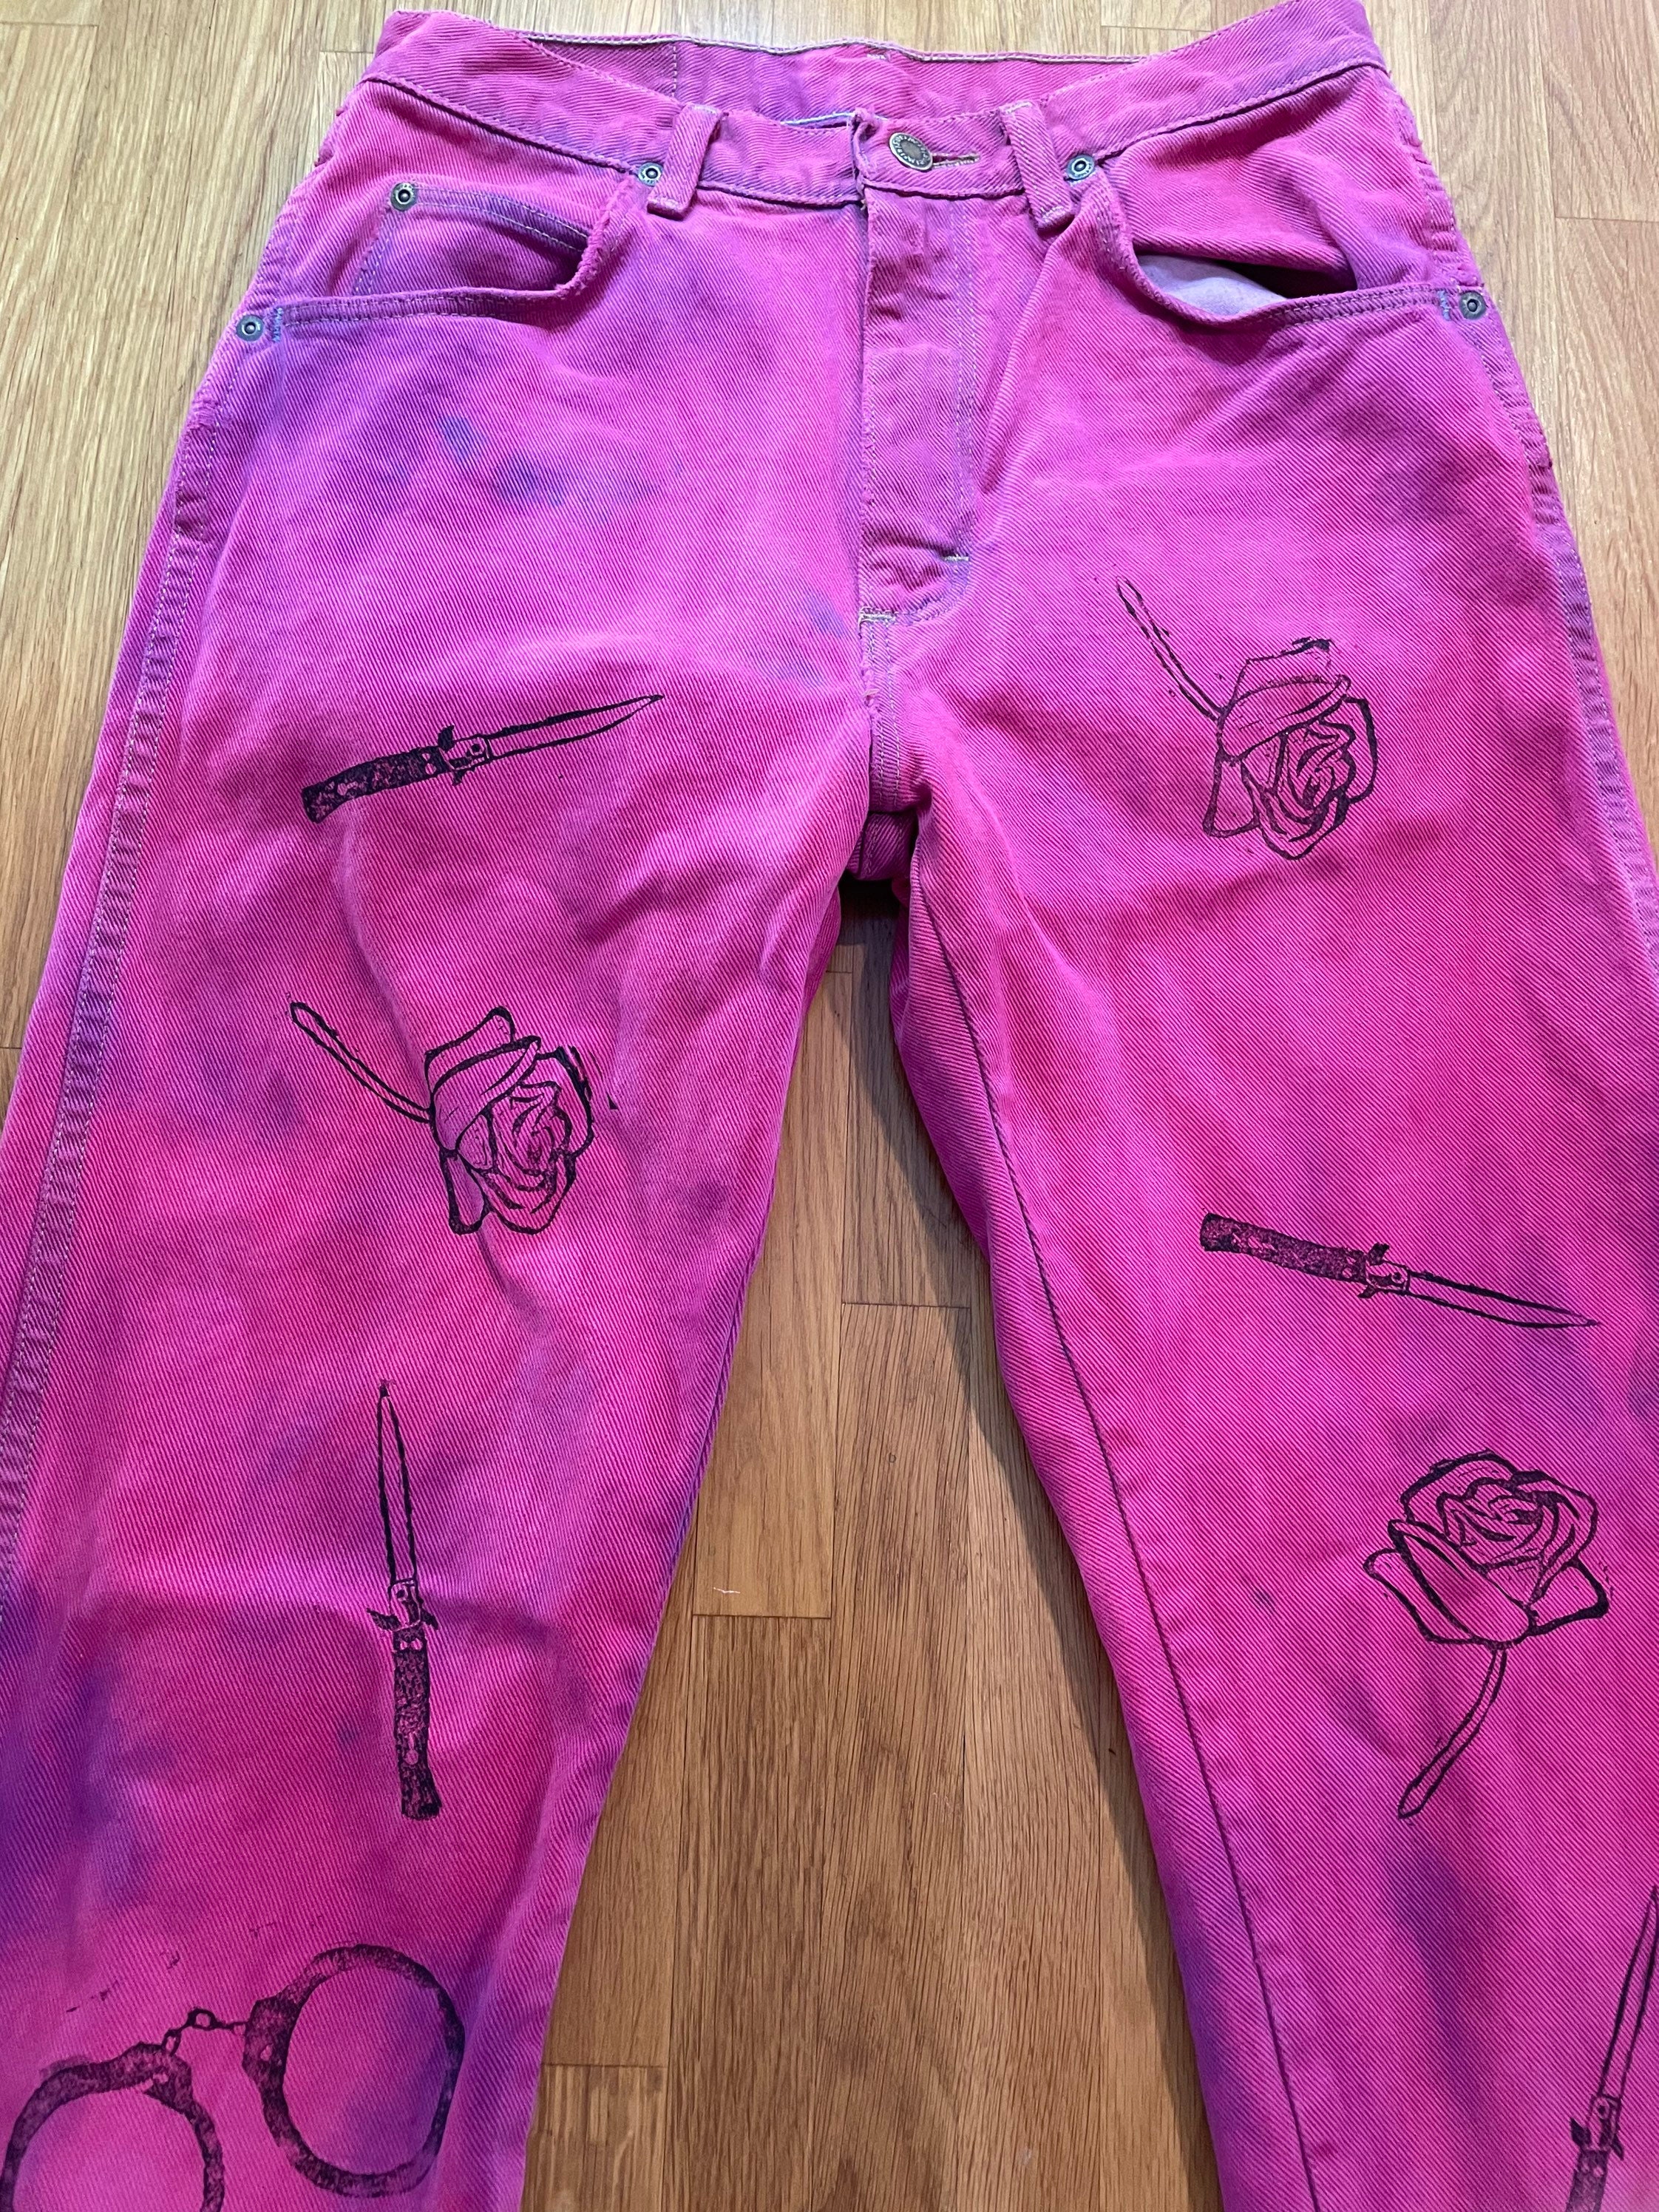 Bright Pink / Purple Hand-dyed and Hand-stamped Wrangler Jeans - Etsy